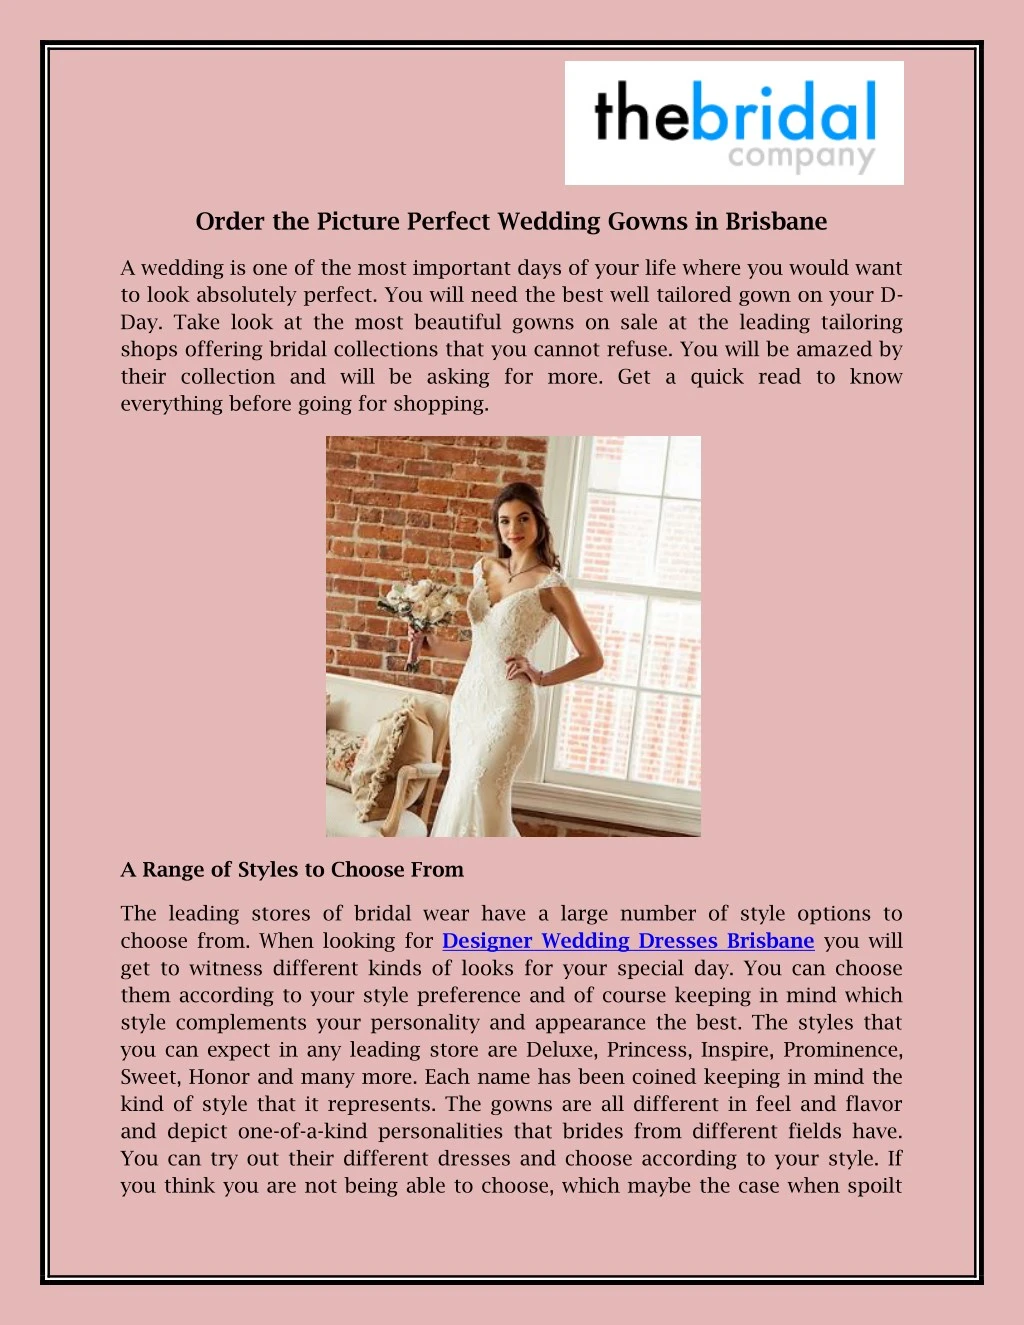 order the picture perfect wedding gowns